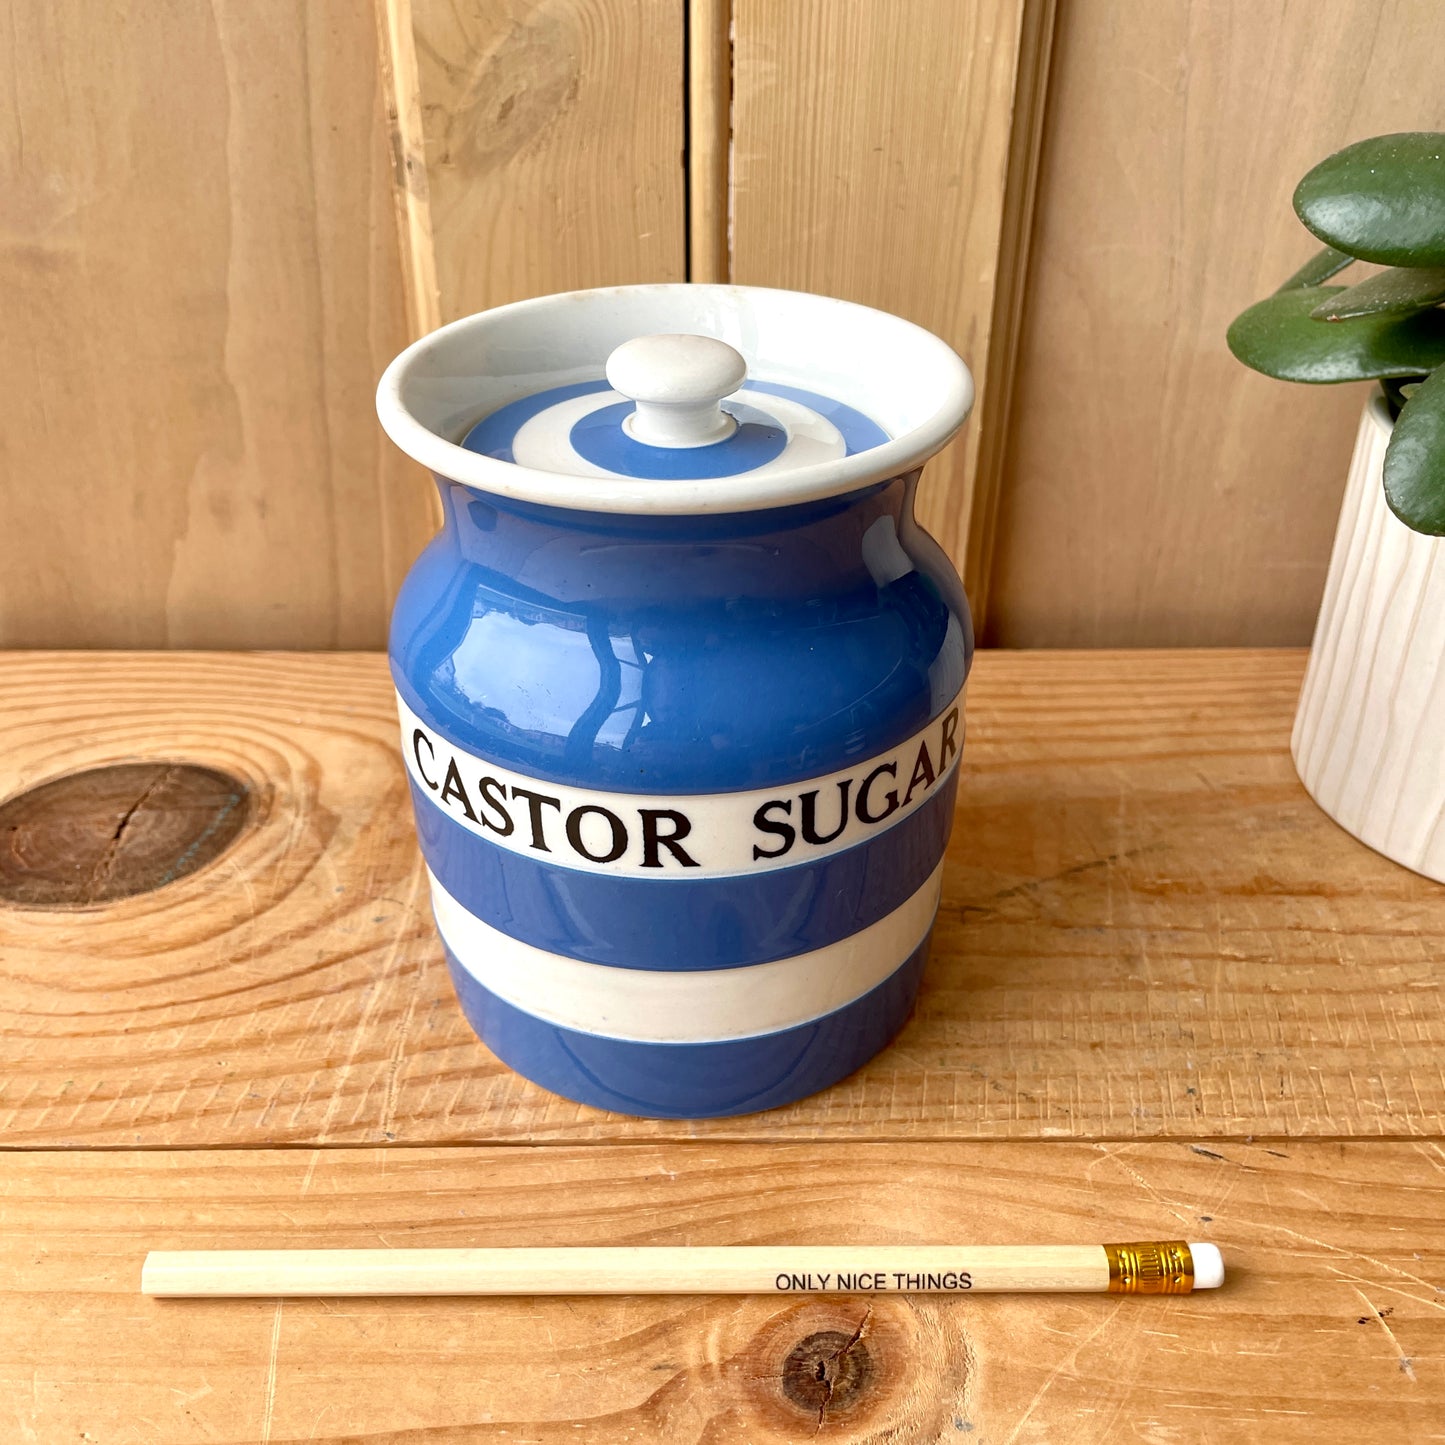 TG Green Blue and White Castor Sugar Canister